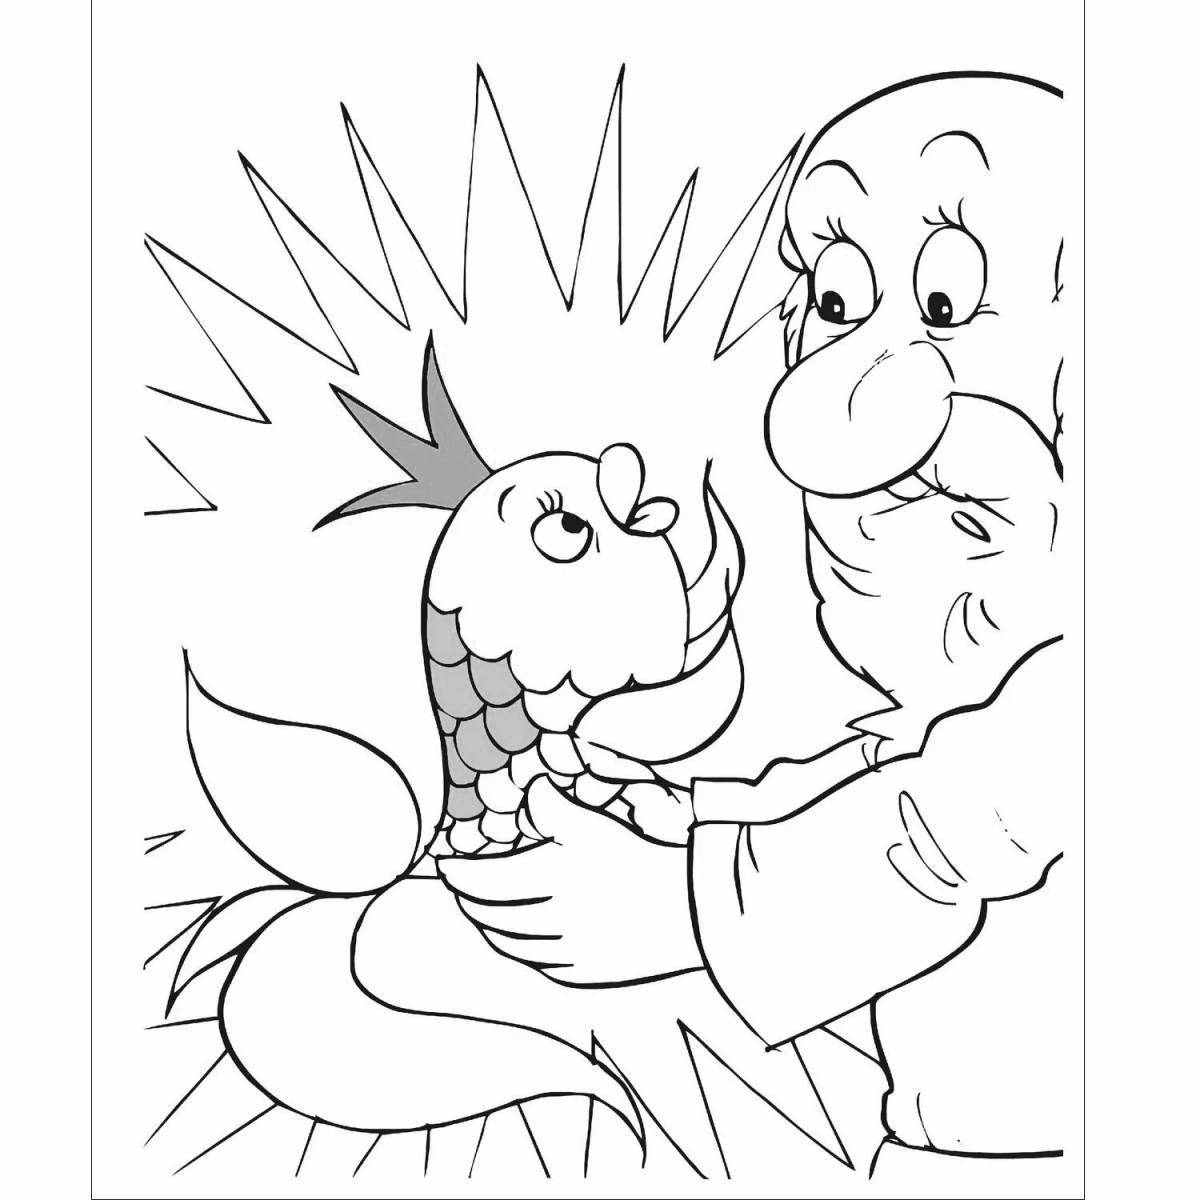 Coloring page charming fisherman and fish